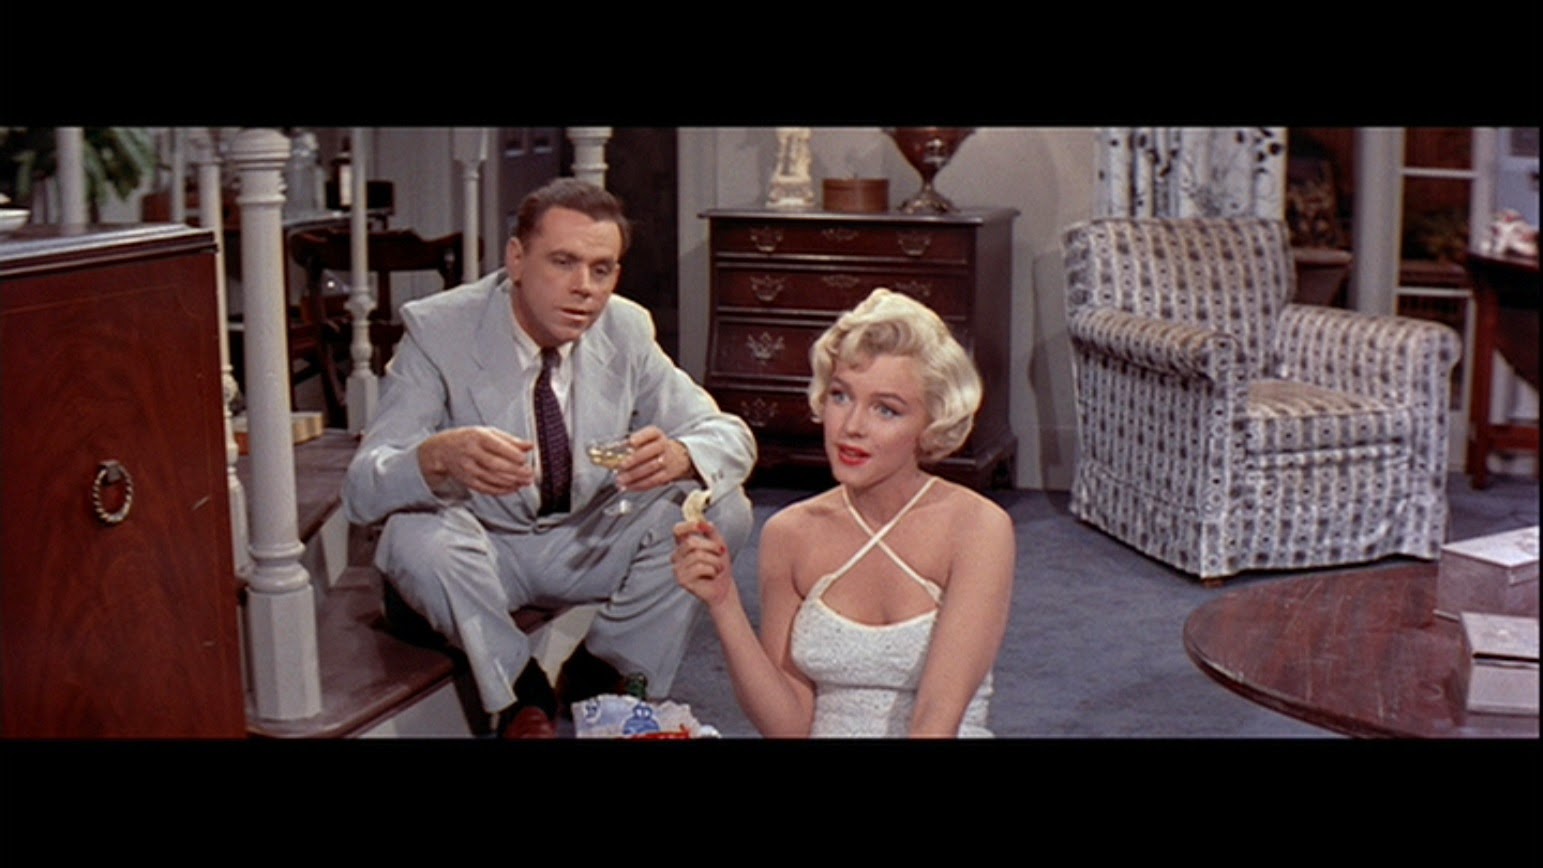 Happyotter: THE SEVEN YEAR ITCH (1955)1543 x 868